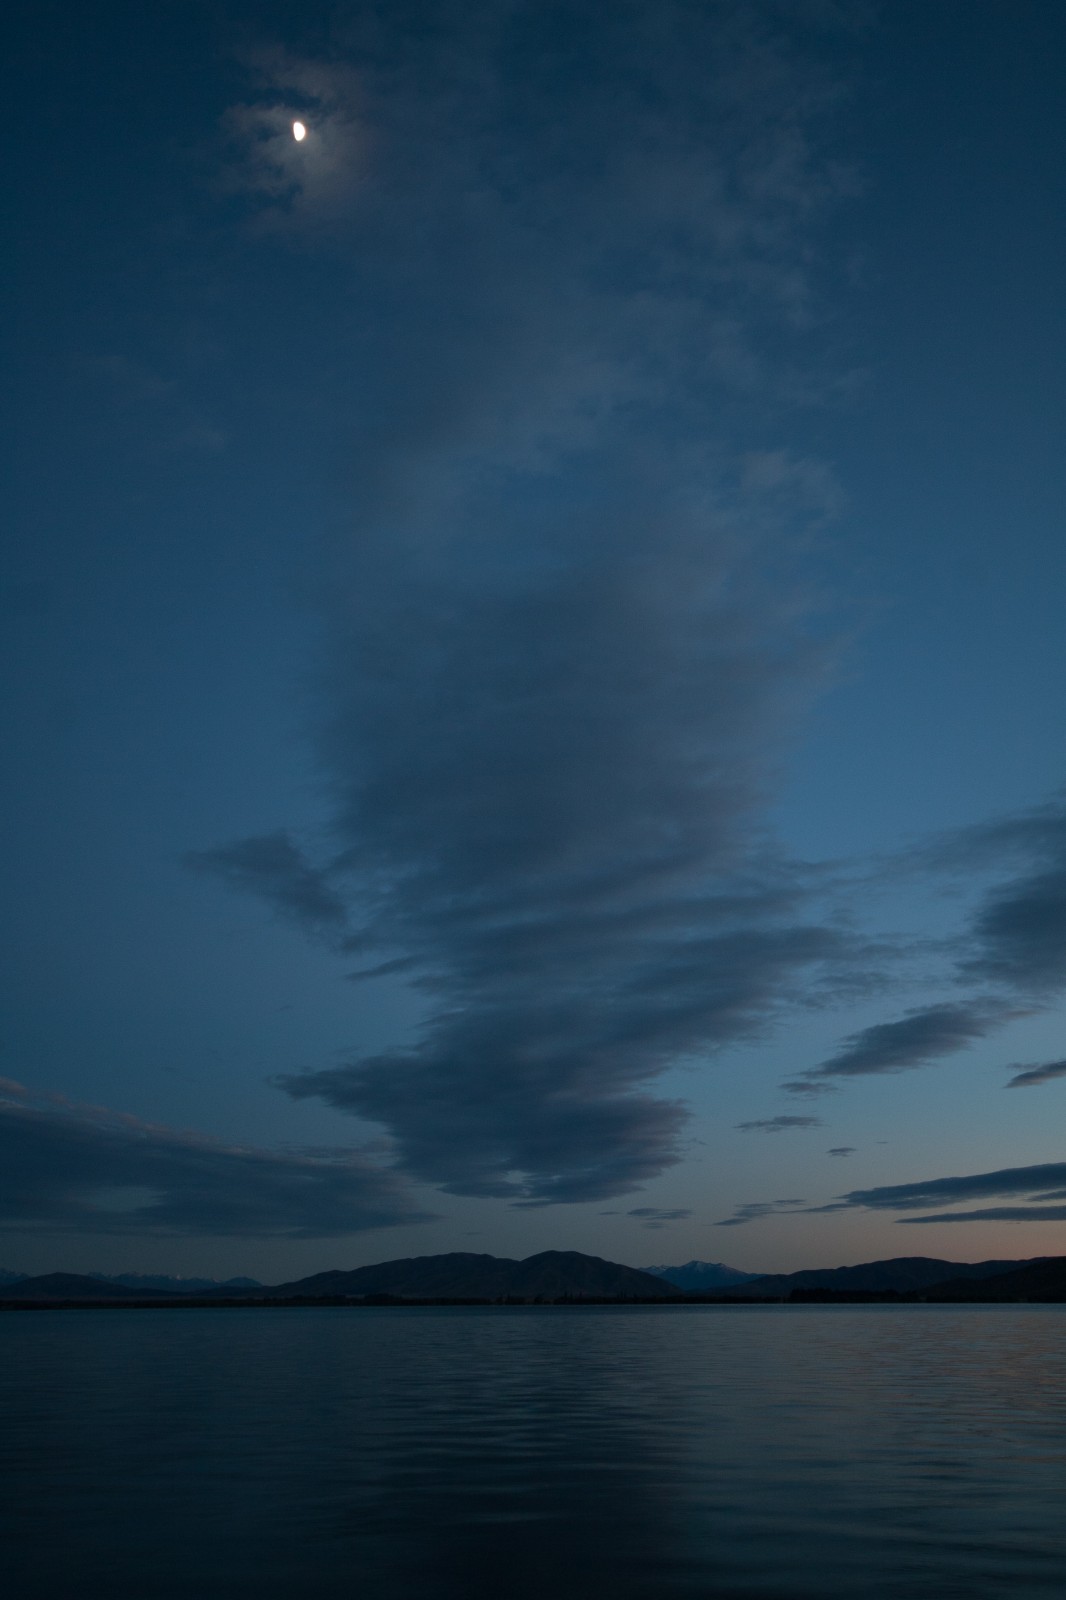 just before sunrise, view of lake and clouds with moon visible top of frame